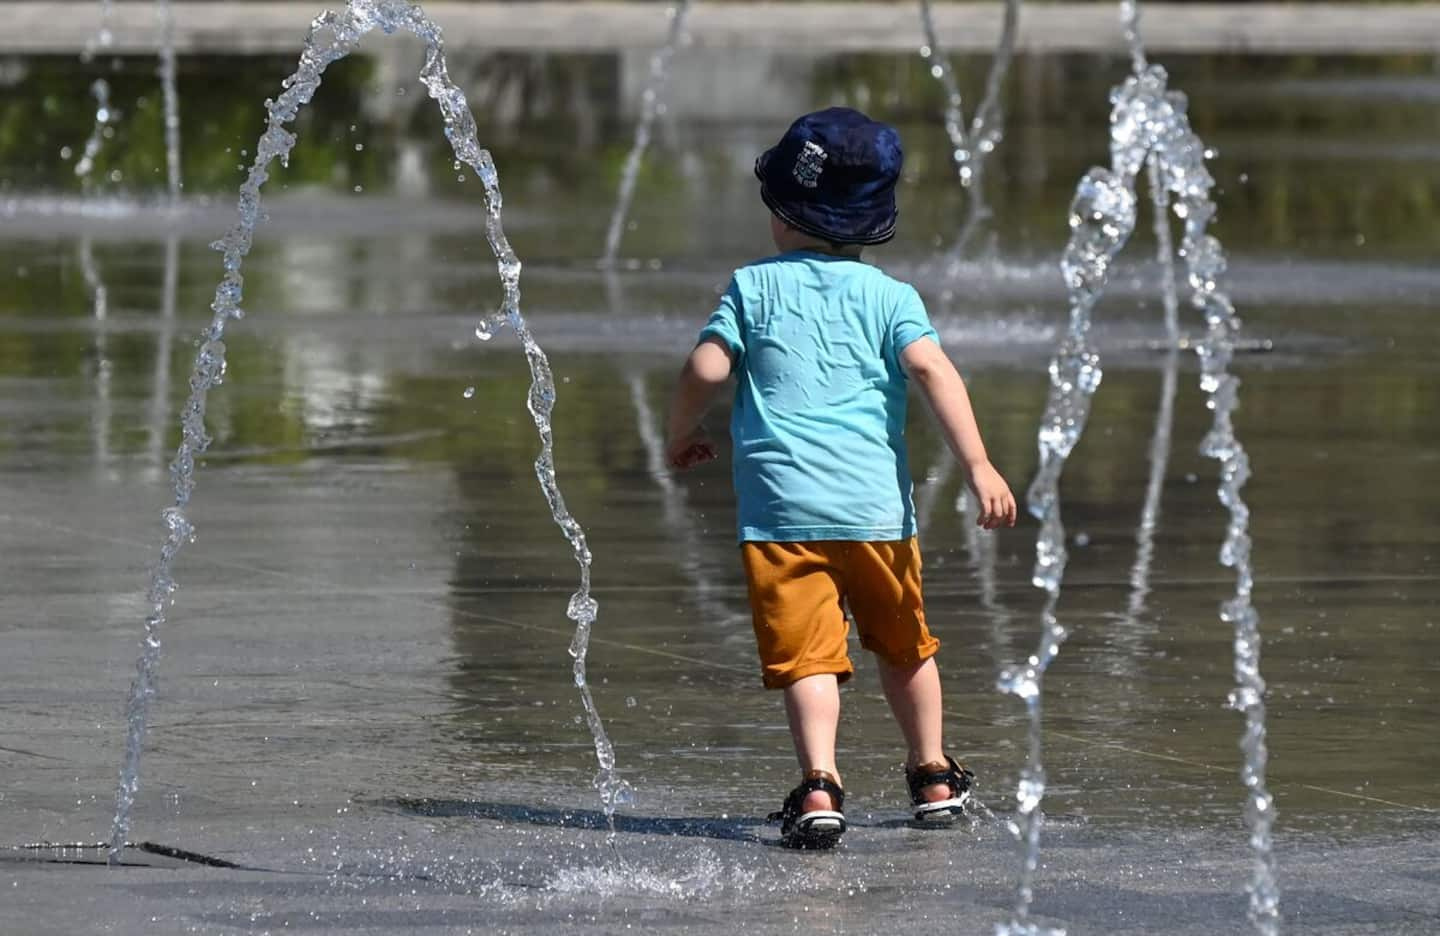 Weather: Another hot and sweltering day for the entire province